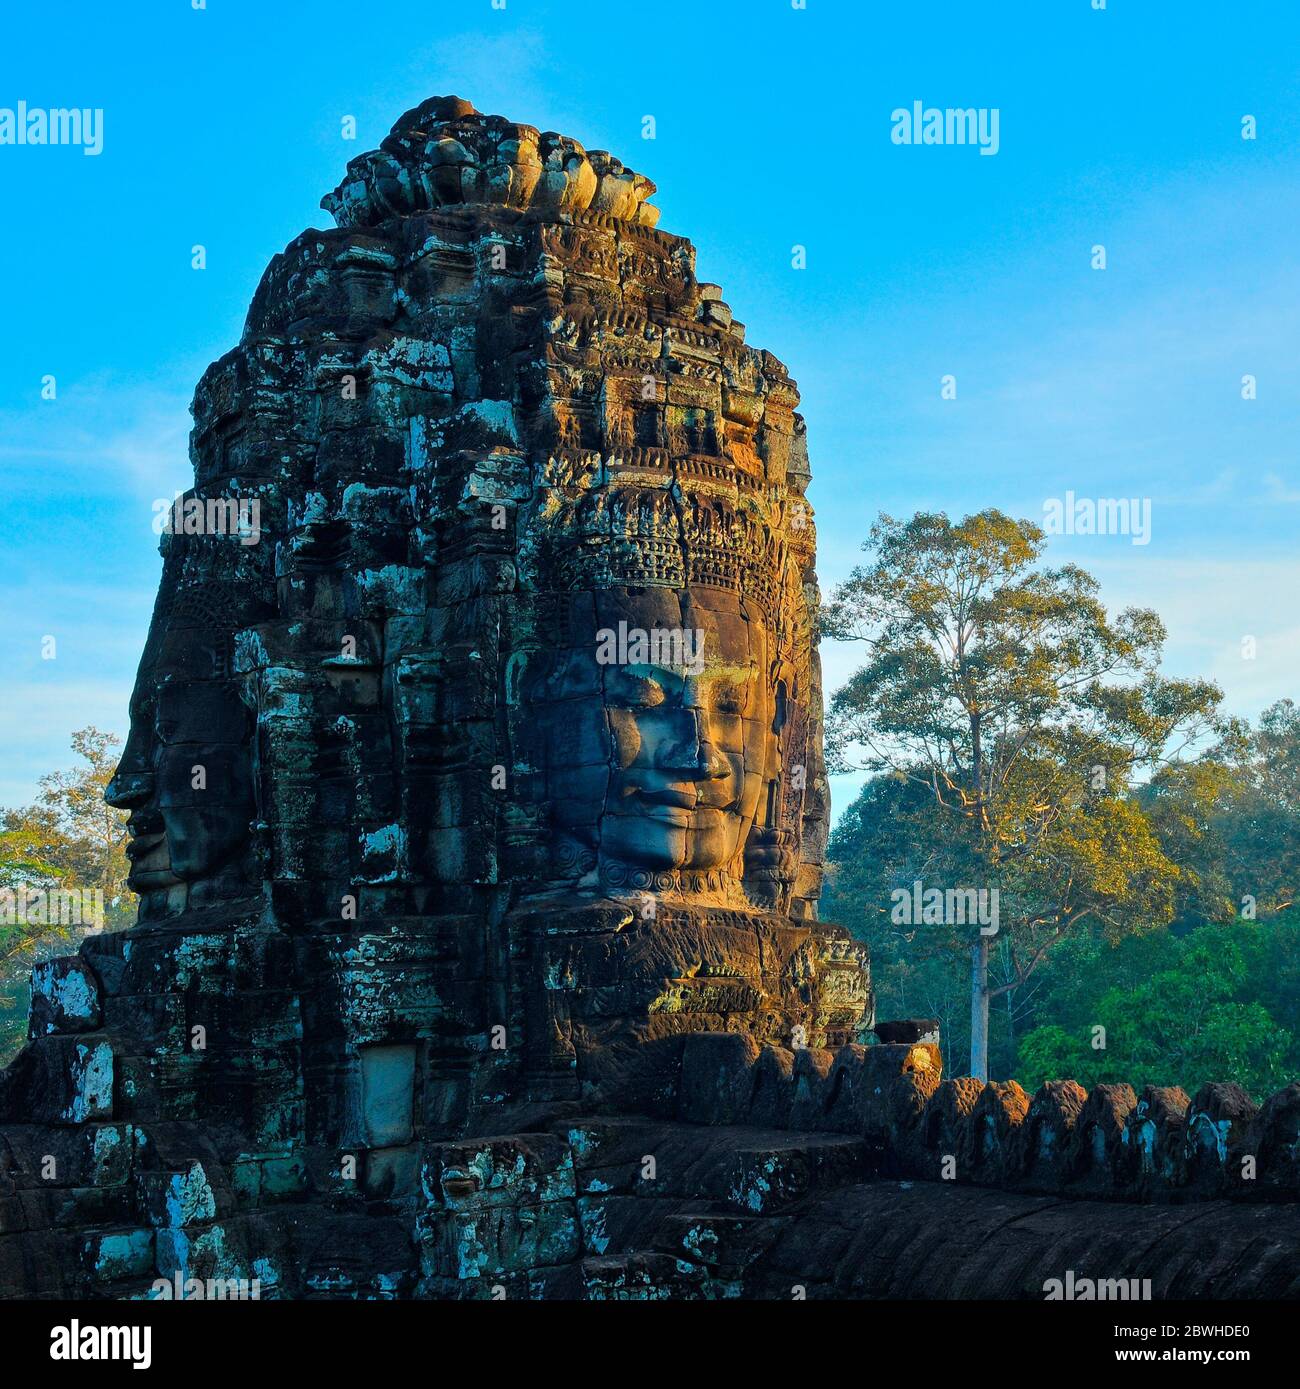 A Buddha face illuminated at sunrise in the Bayon temple with rainforest in the background, Angkor Thom, Siem Reap, Cambodia. Stock Photo